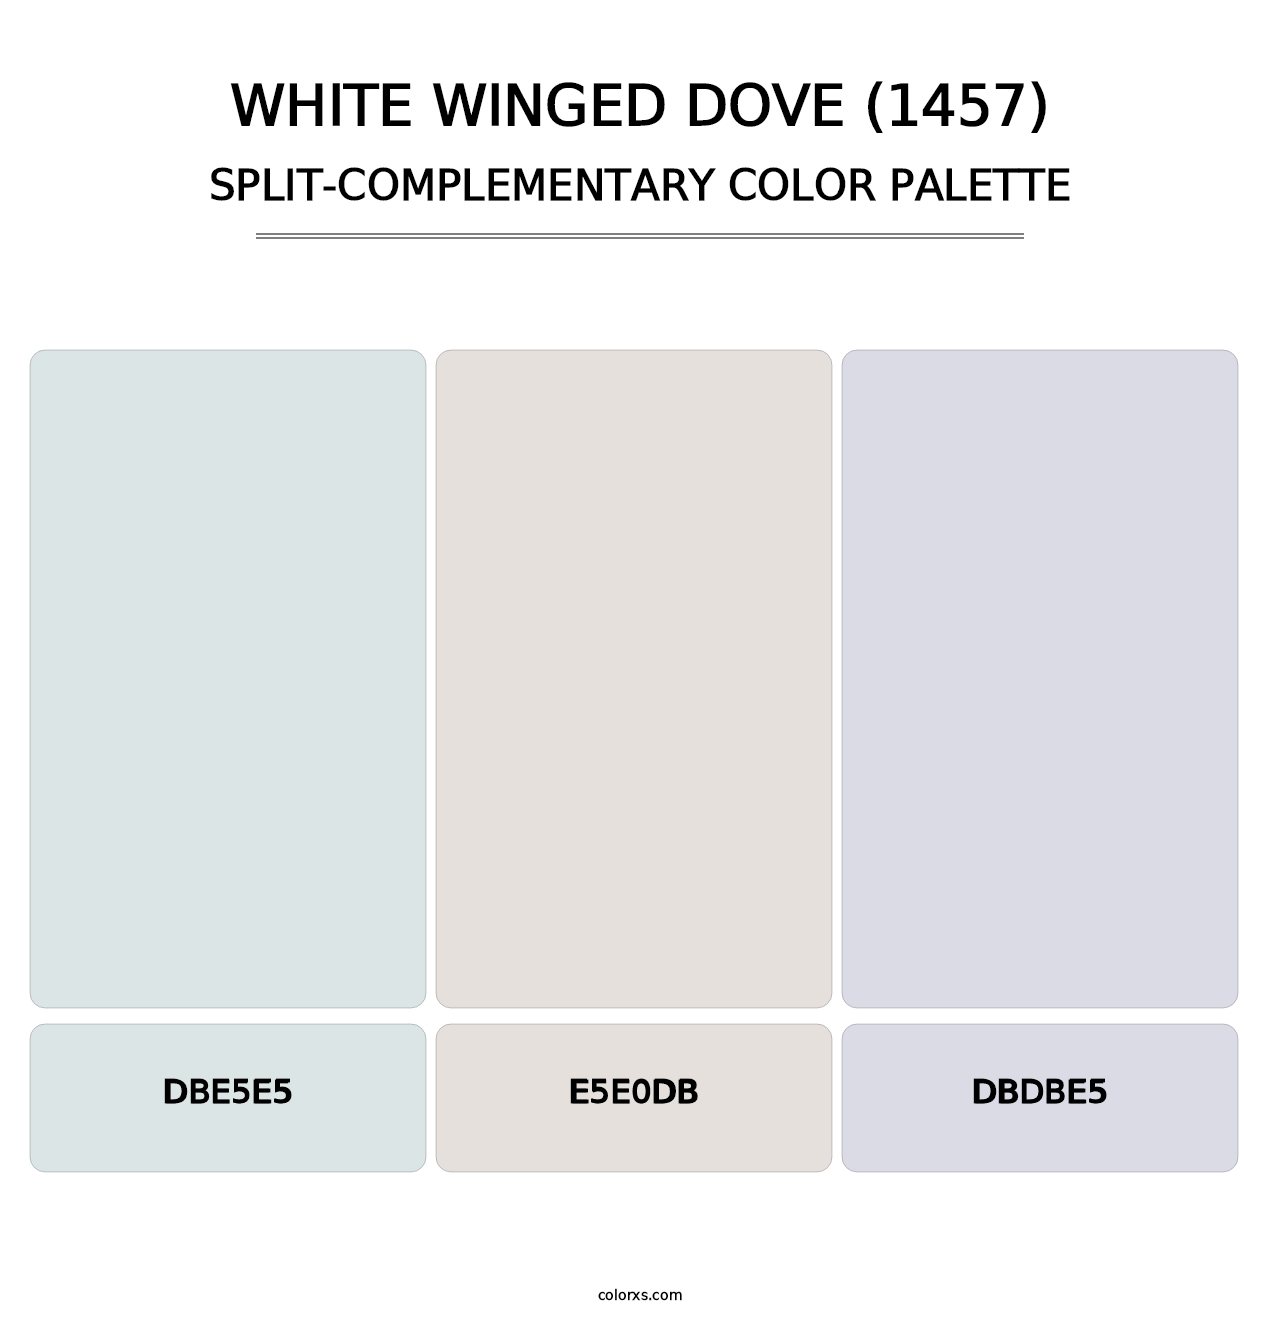 White Winged Dove (1457) - Split-Complementary Color Palette